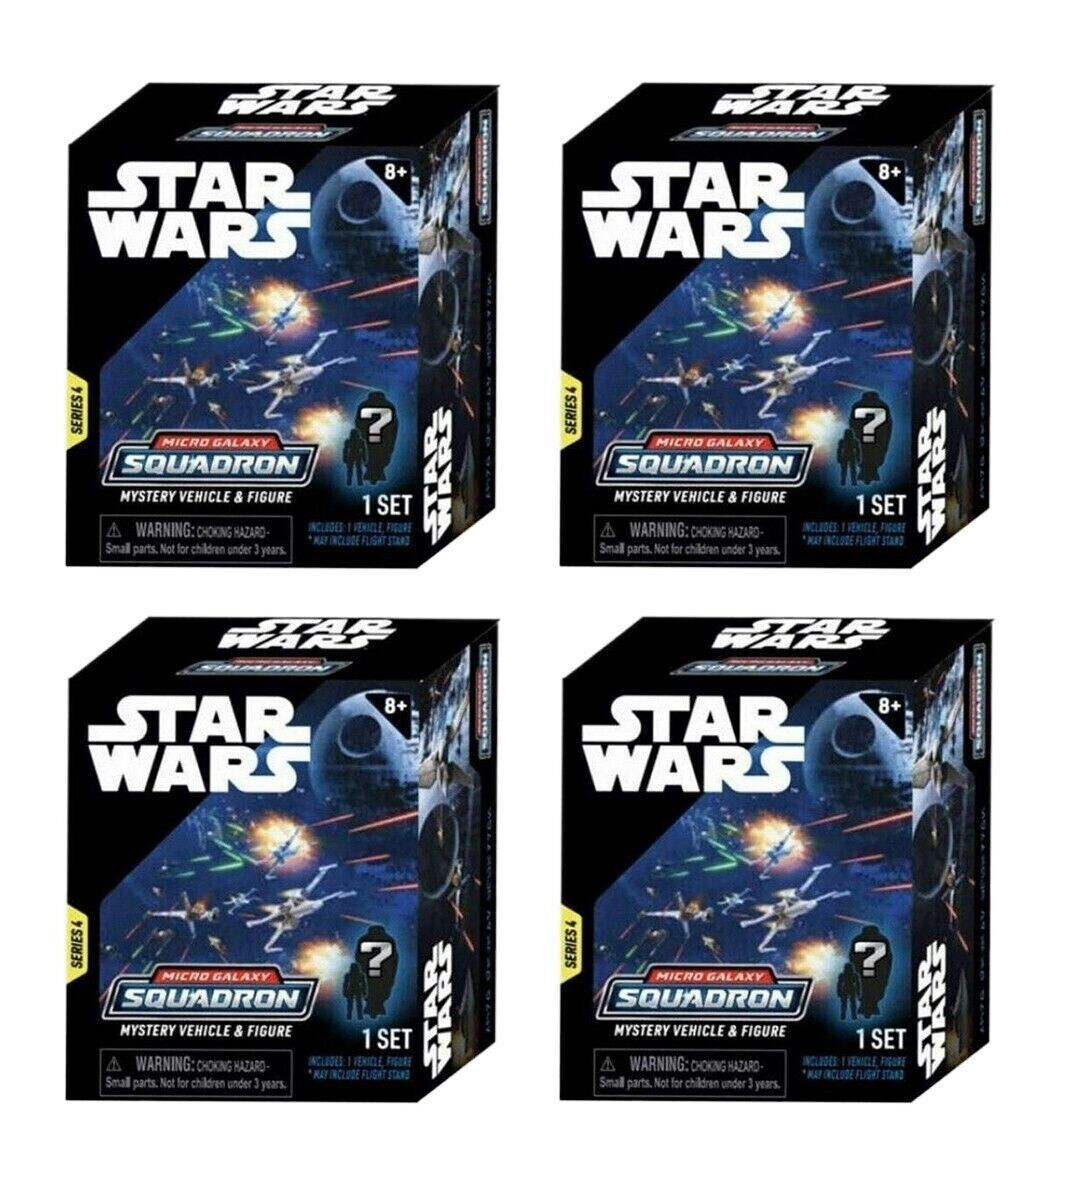 Star Wars Micro Galaxy Squadron Series 4 Scout Box SEALED - 4 PACK